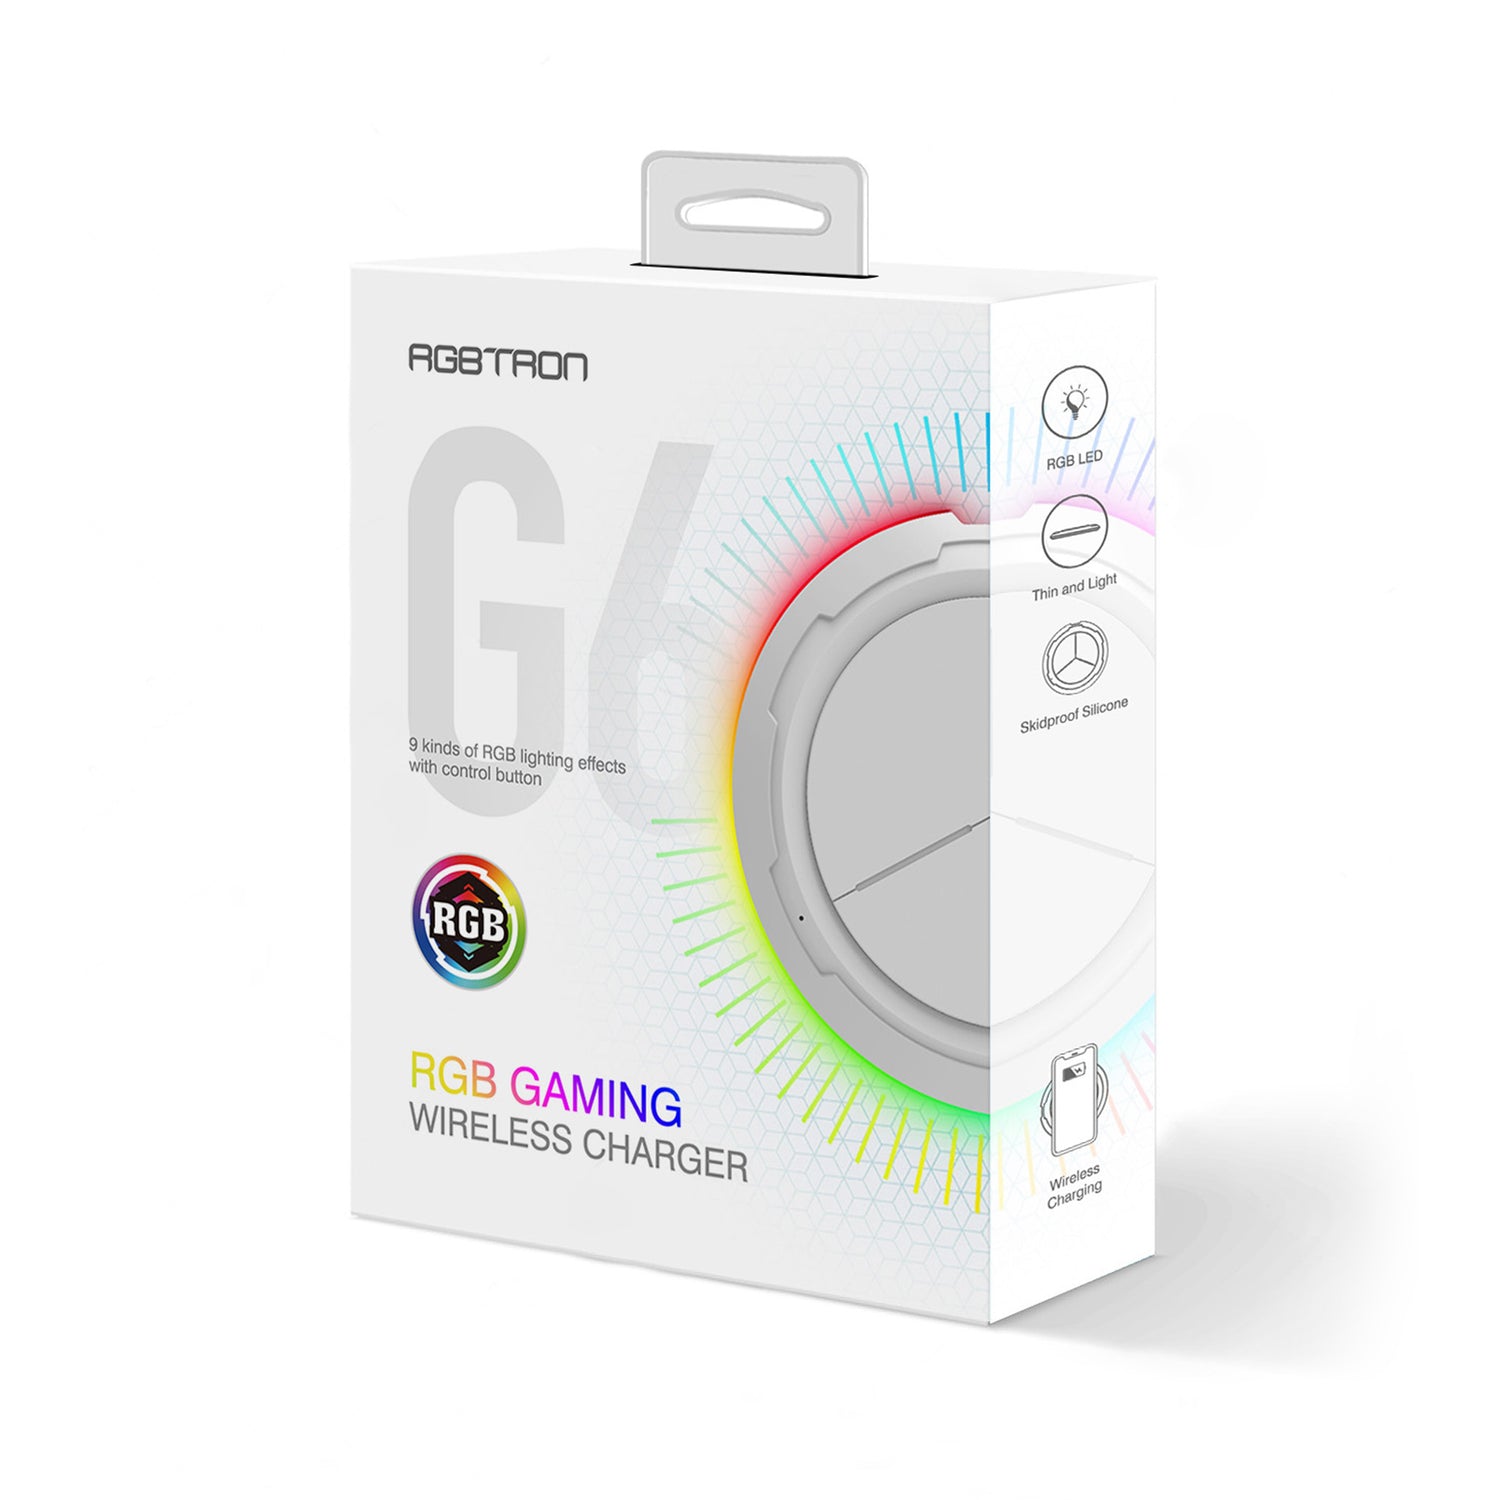 RGBTRON DT-G6 wireless charger customizing various colors and logos, yellow, green, purple, pink, blue,